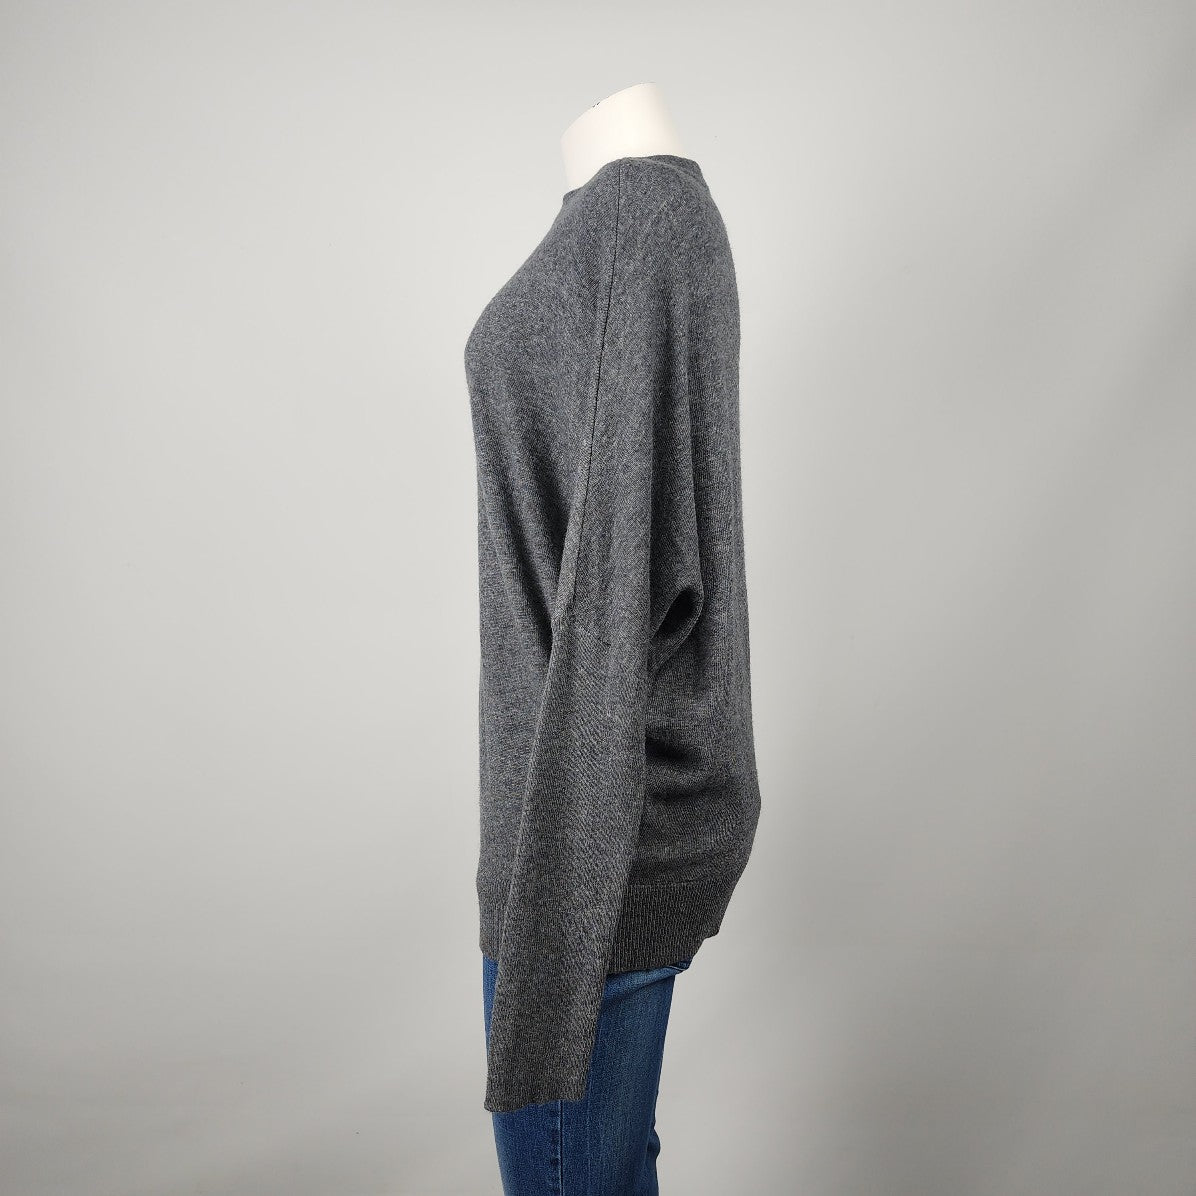 Contemporaine Grey Knit Wool Blend Sweater Size S